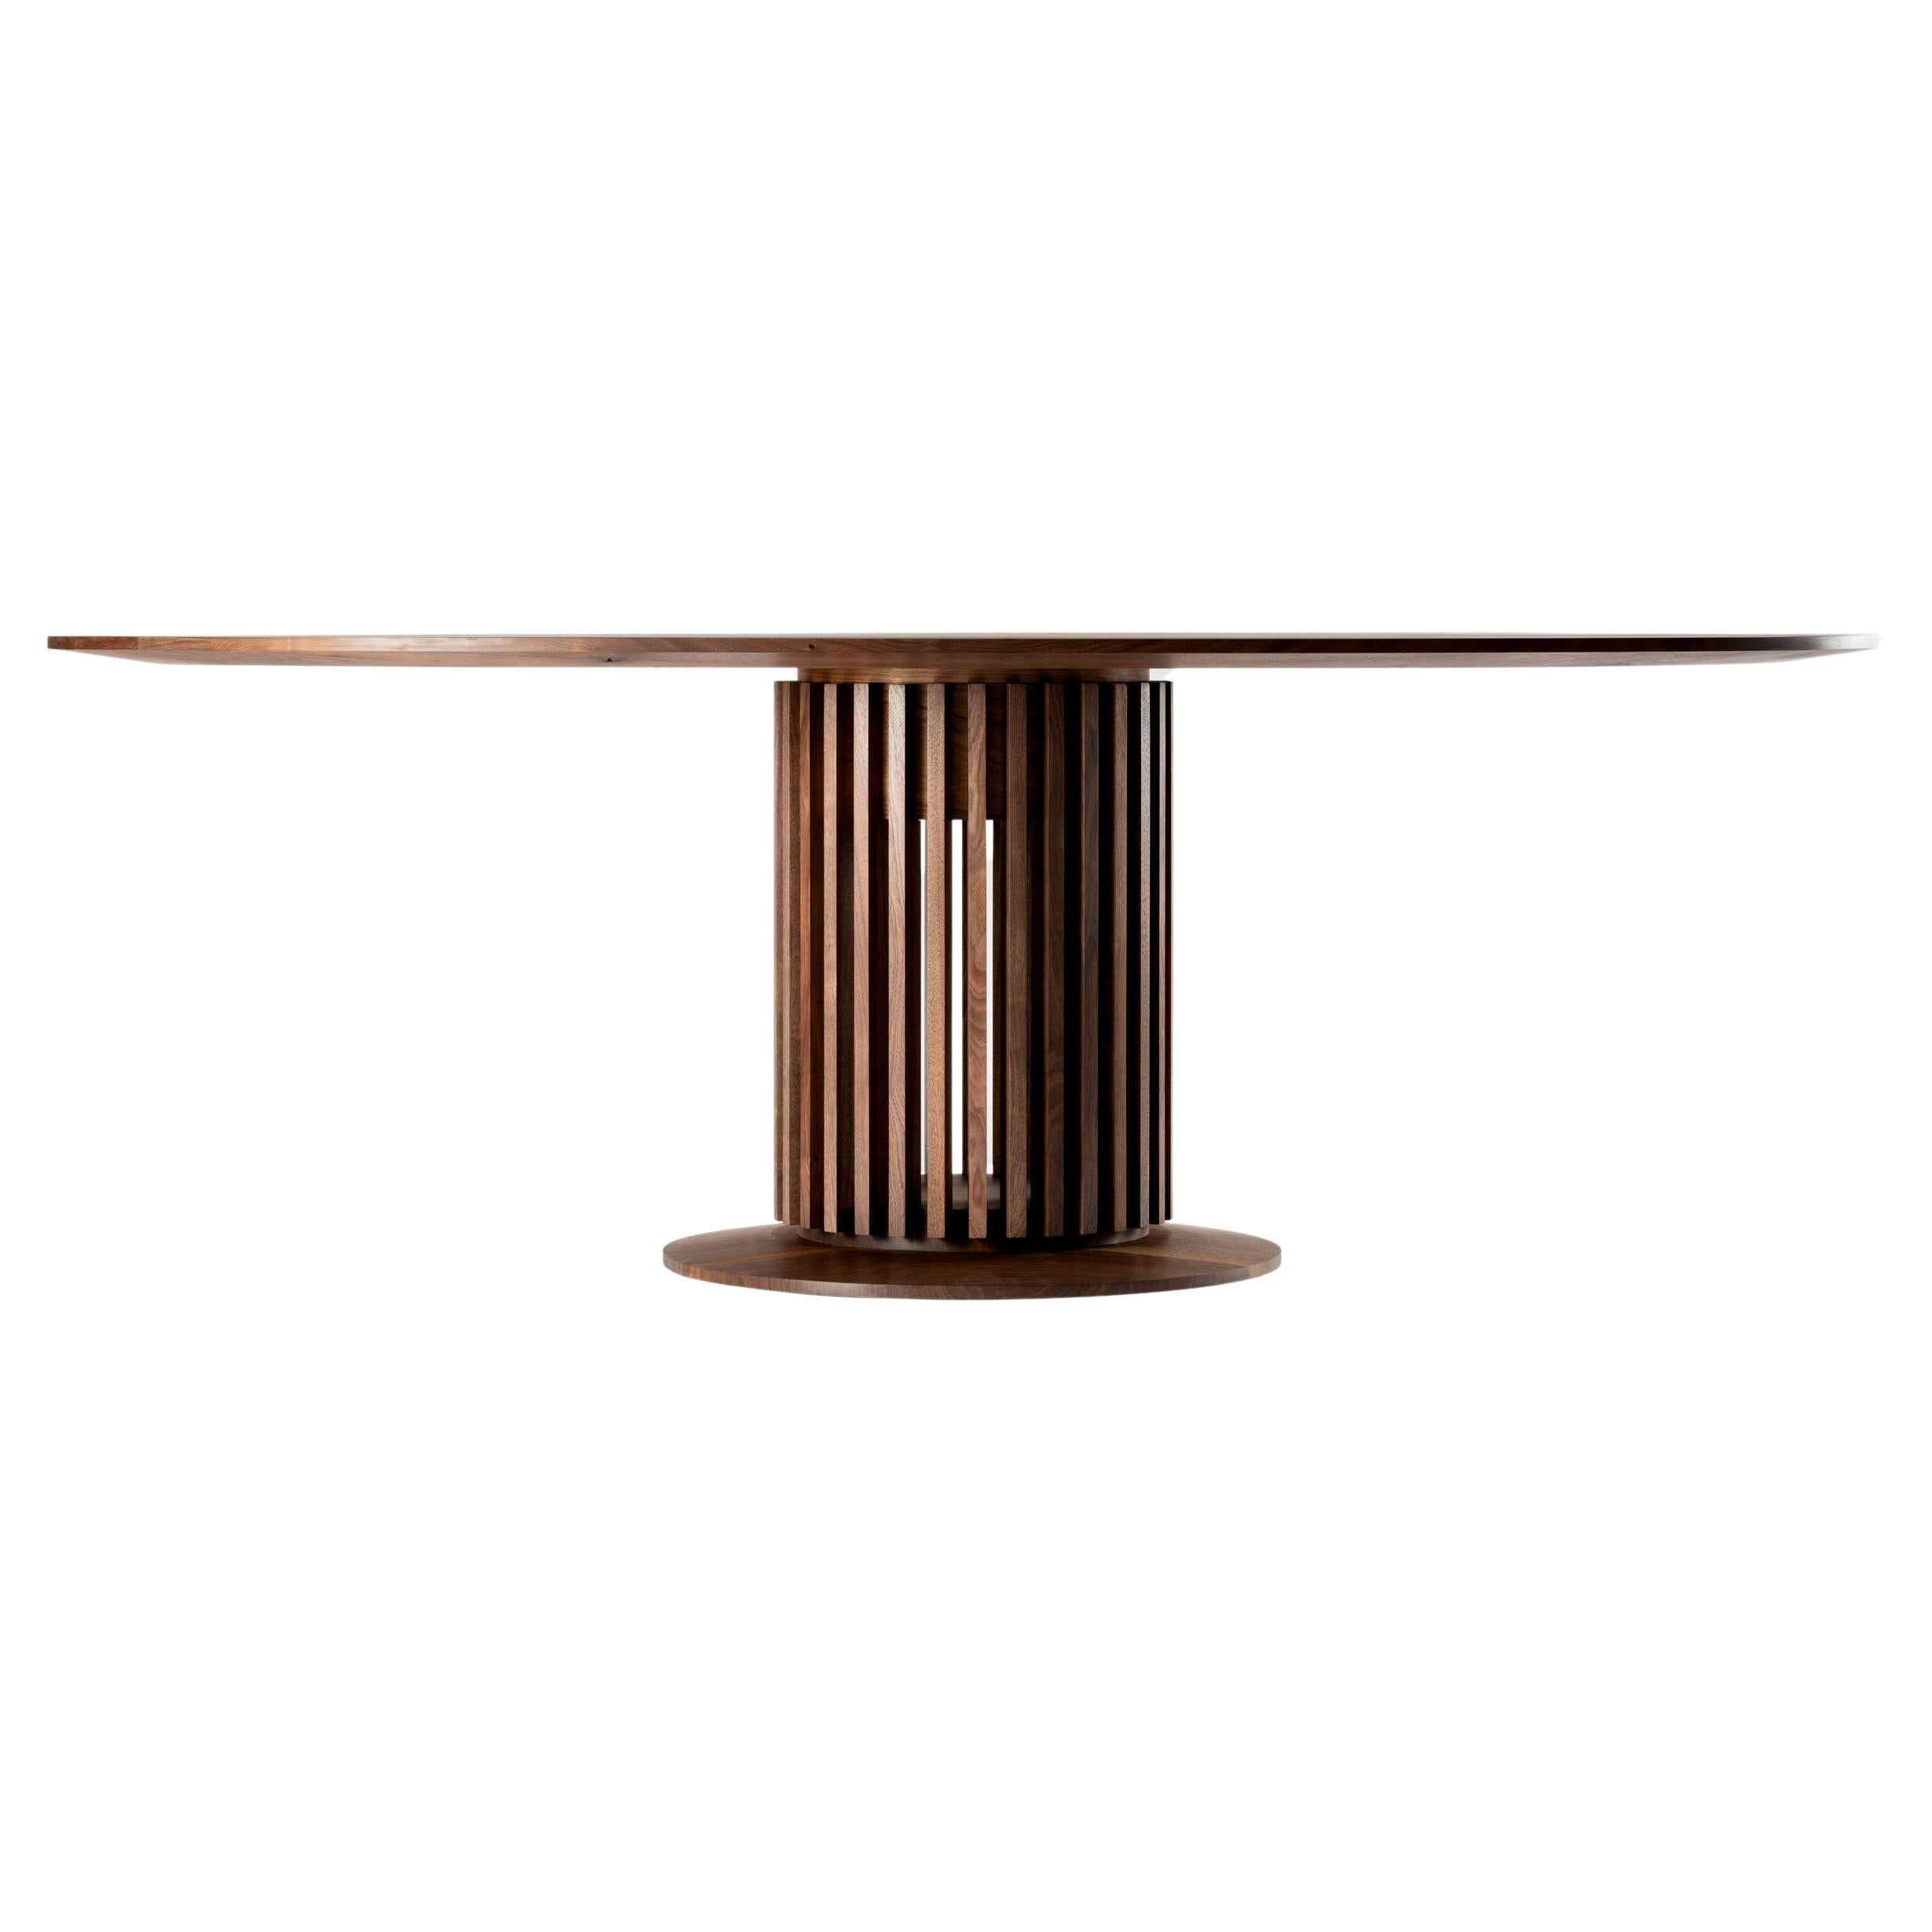 Contemporary, Solid American Walnut Handmade Ante Table by Tim Vranken For Sale